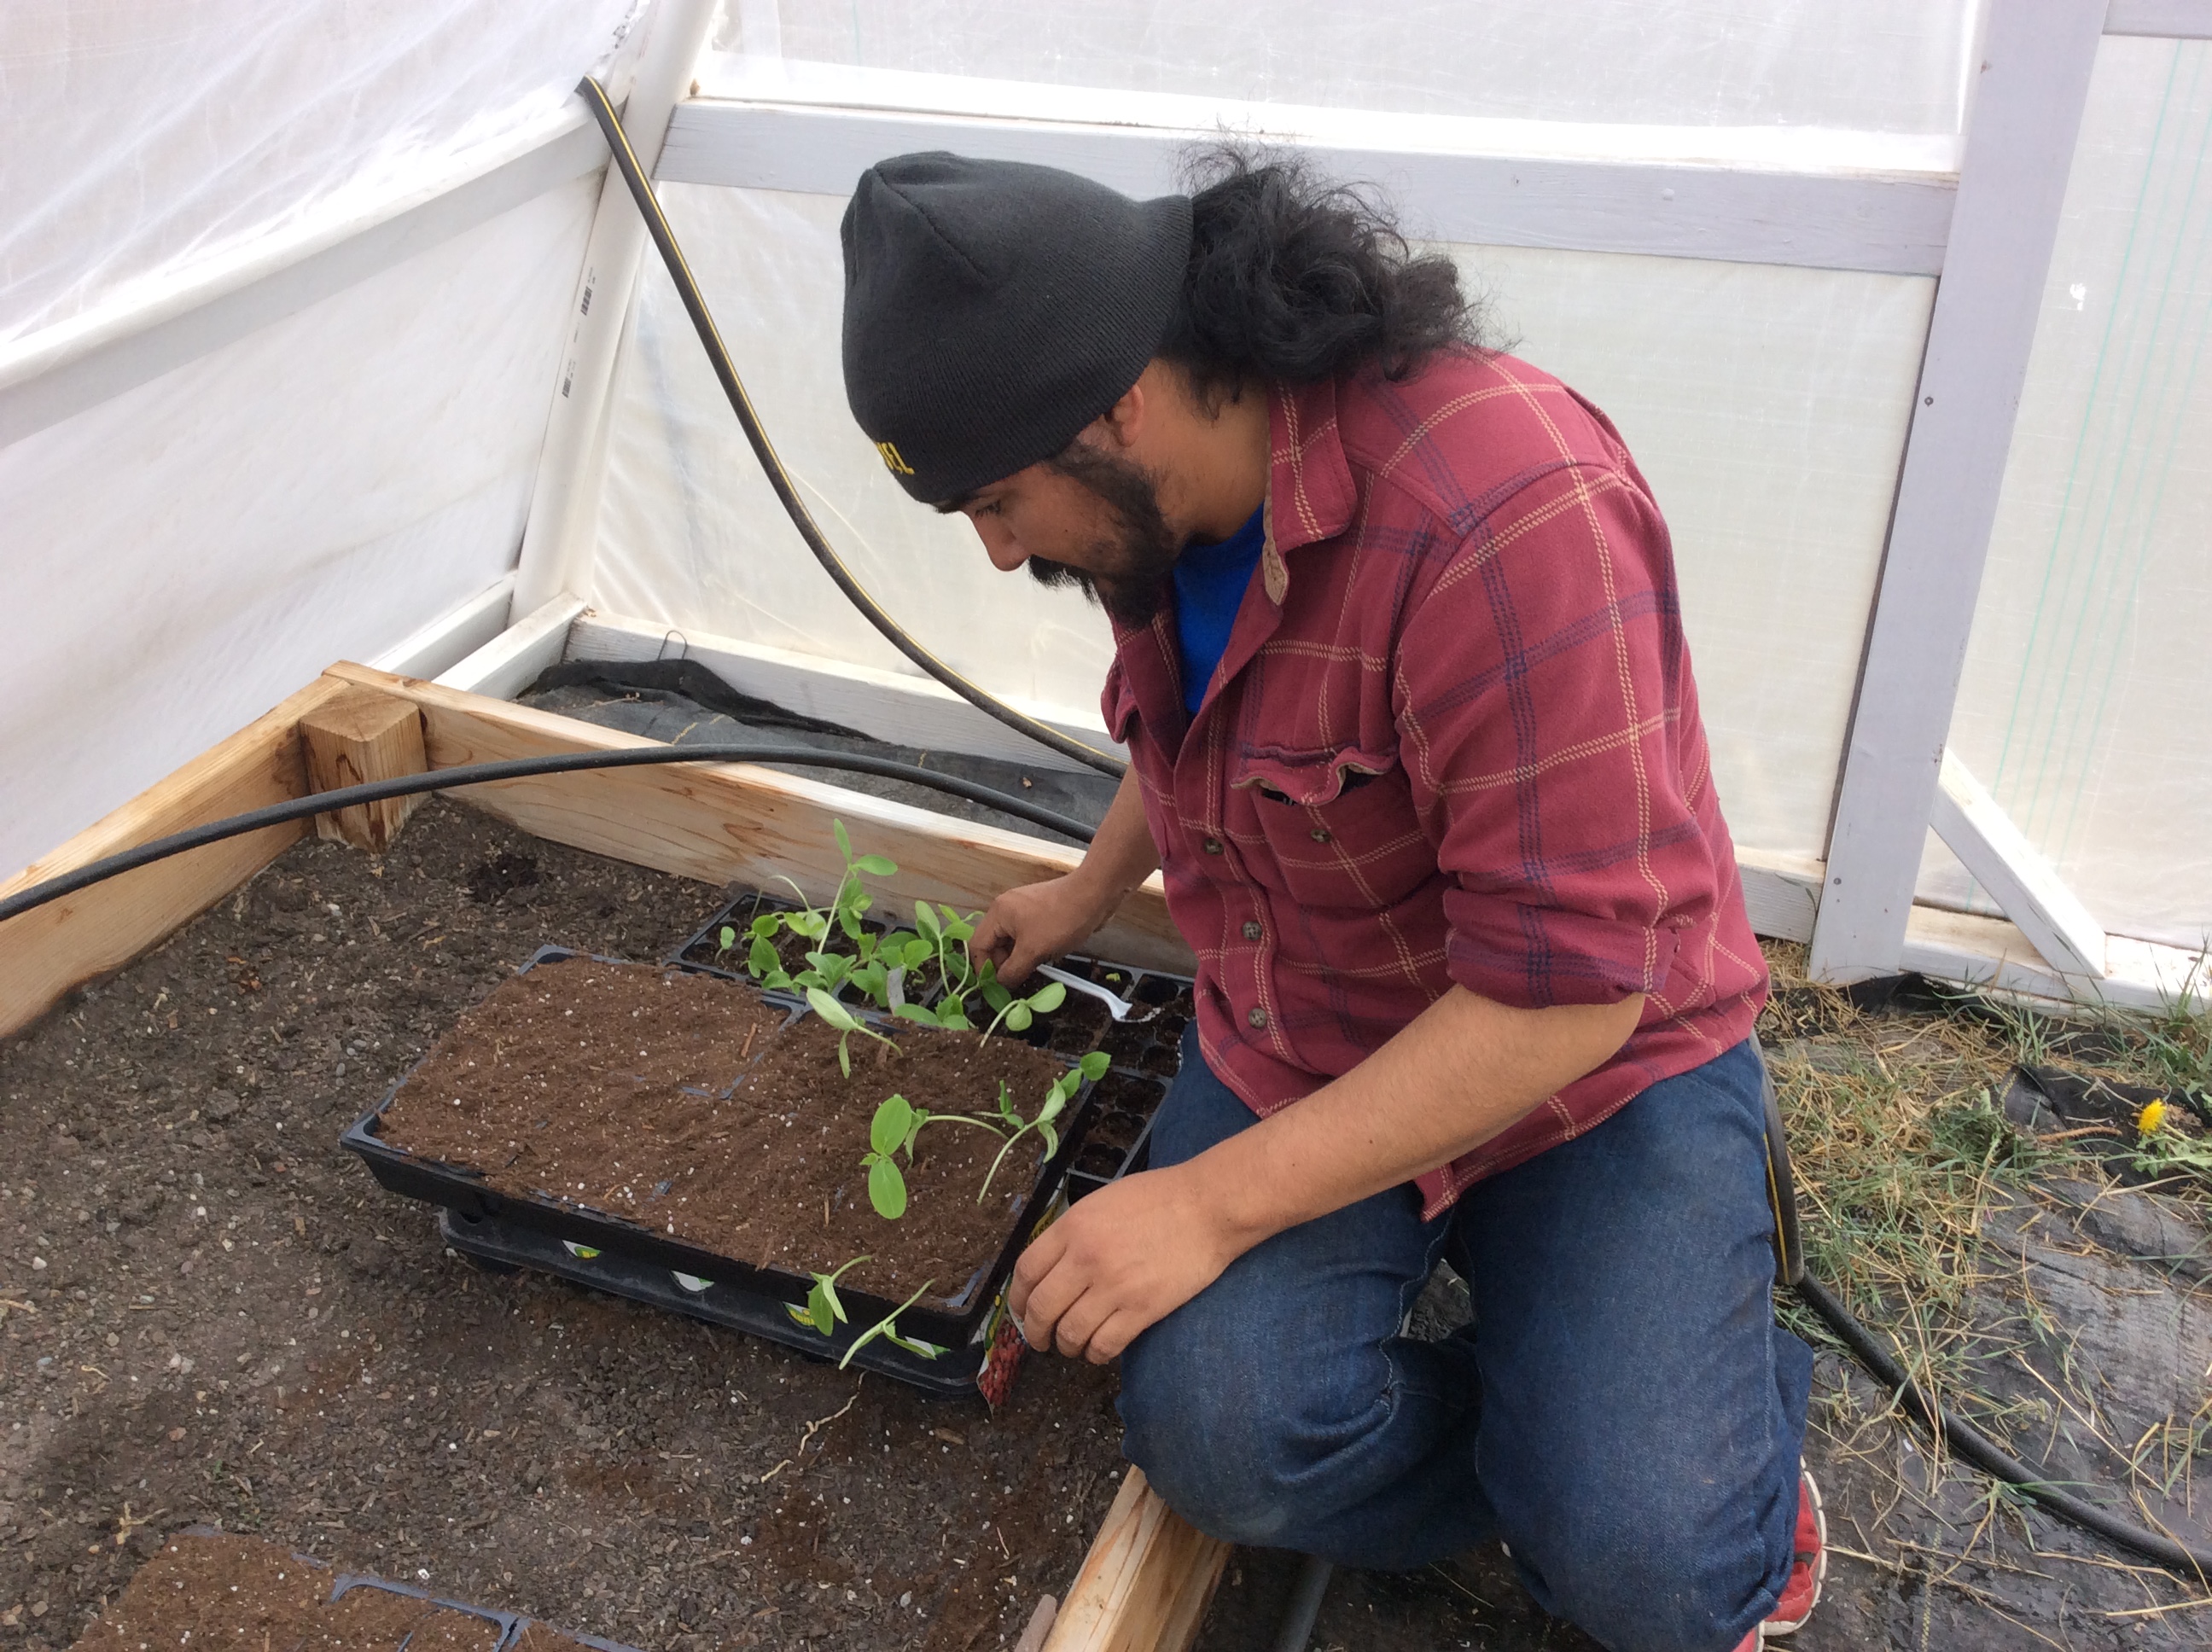 A participant plants seedlings in a tray